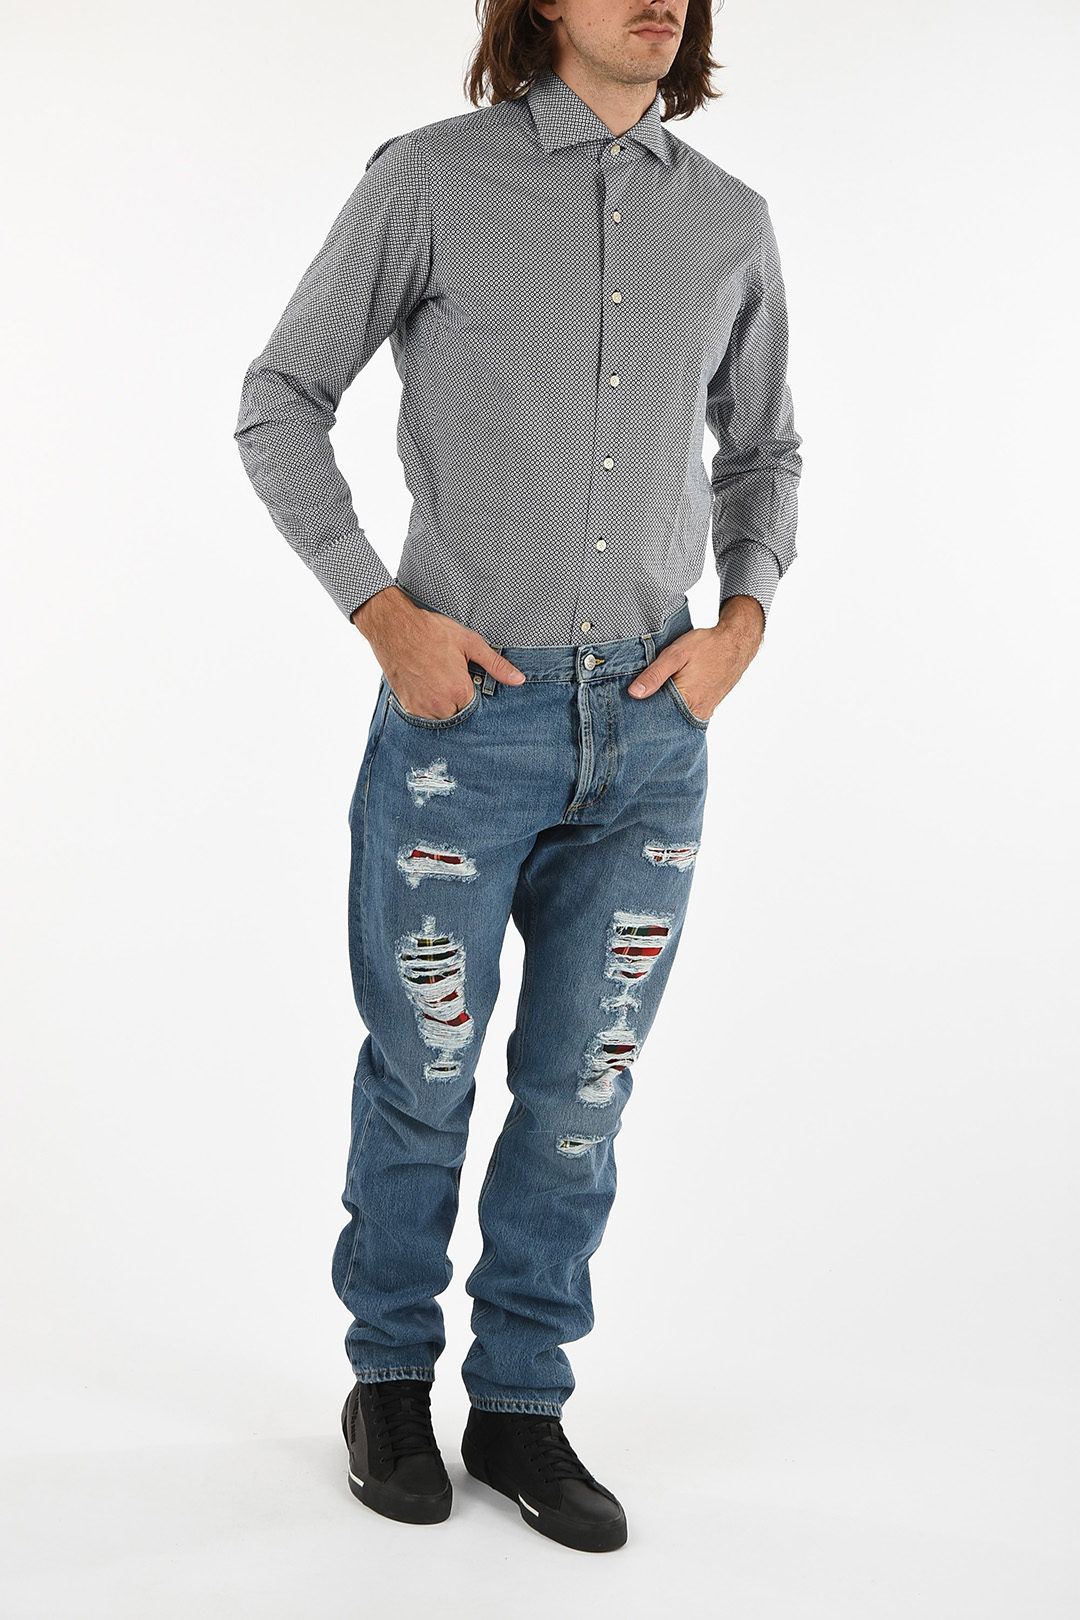 Alexander McQueen ripped Low-rise waist jeans men - Glamood Outlet